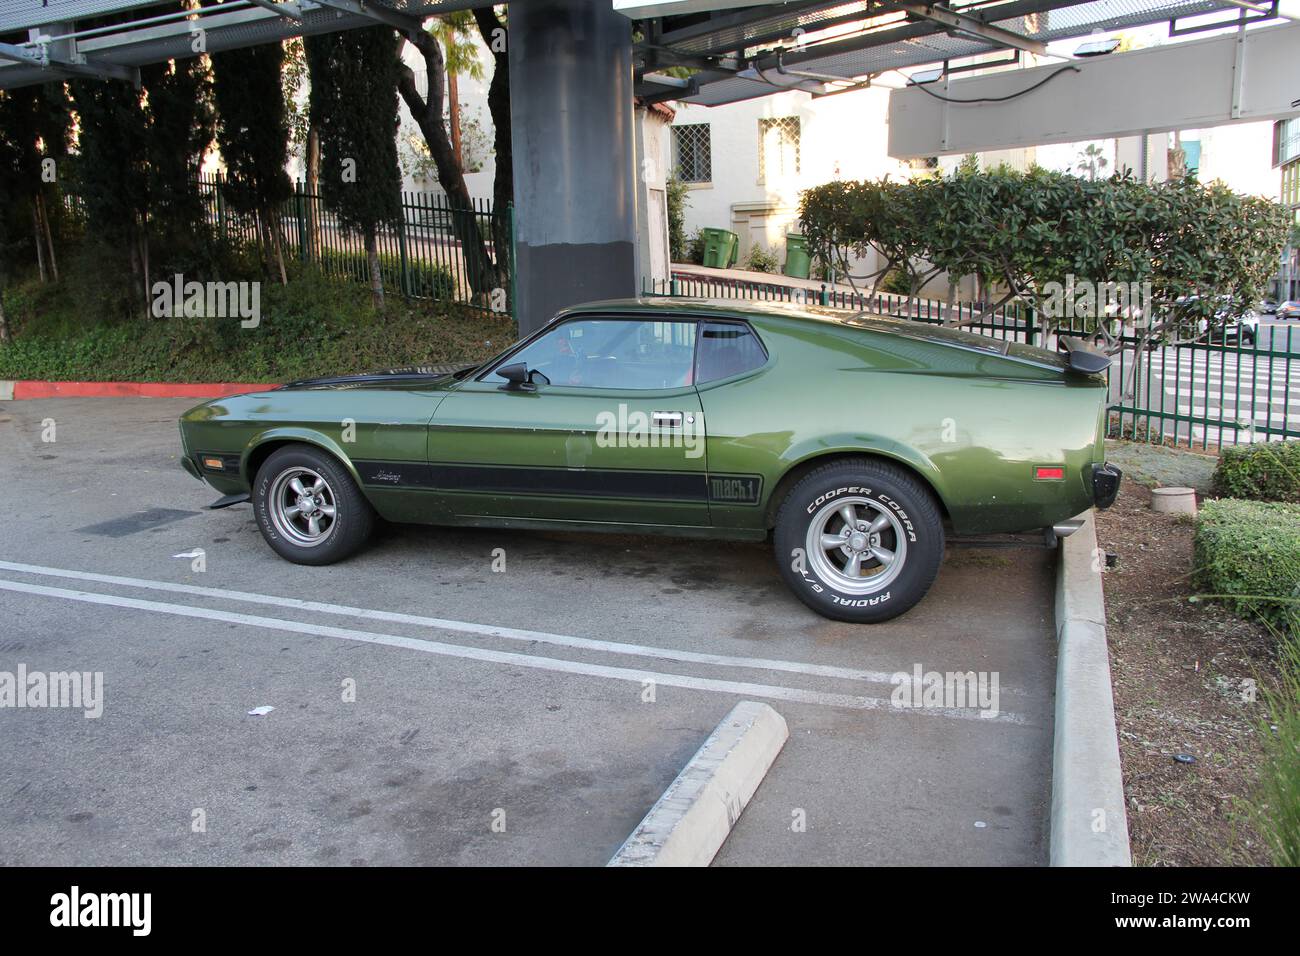 Vintage Ford Mustang Mach 1 Muscle Car Green With Black Stripe Stock Photograph Stock Photo